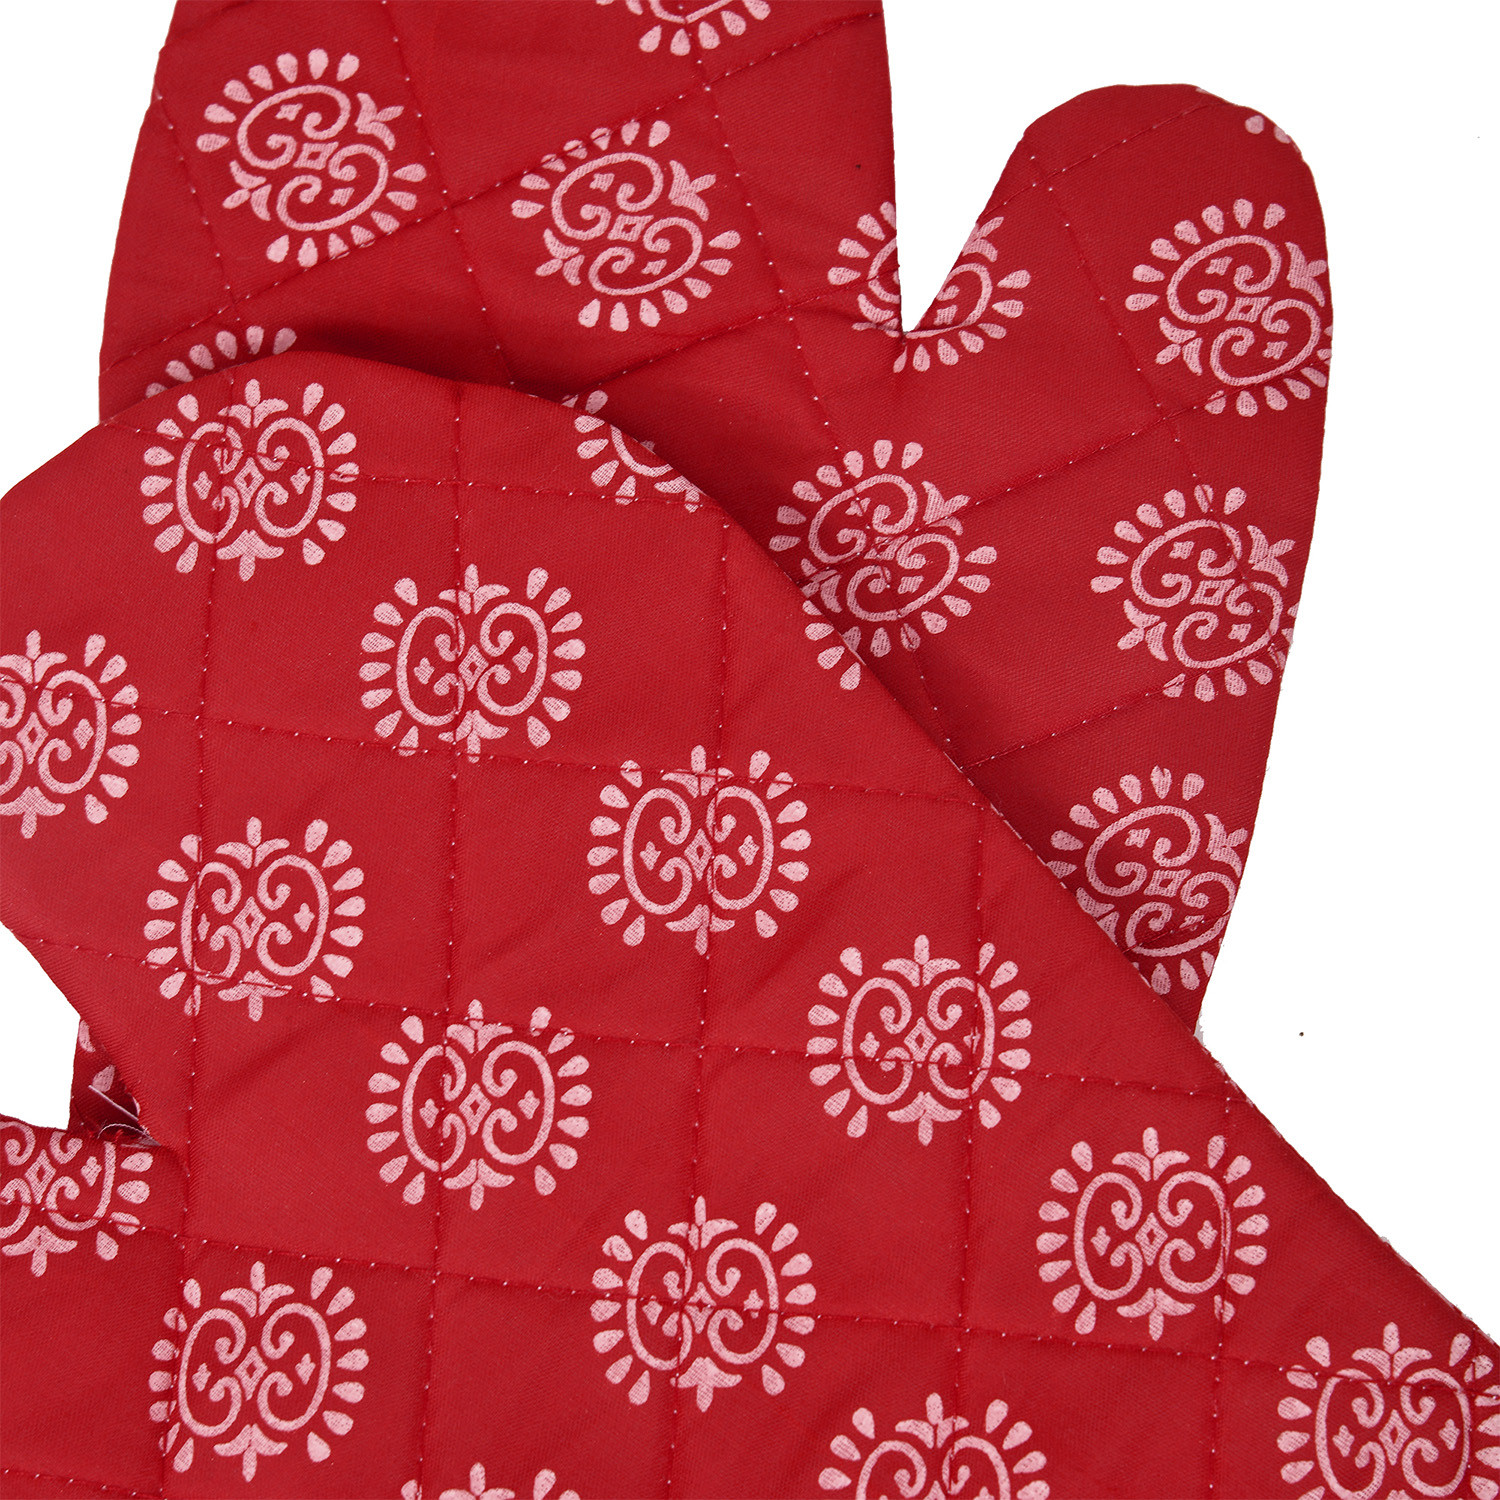 Kuber Industries Oven Mitts | Polyester Microwave Oven Gloves | Printed Hanging Loop Kitchen Oven Gloves | Heat Resistant Gloves For Kitchen | 1 Pair | Maroon